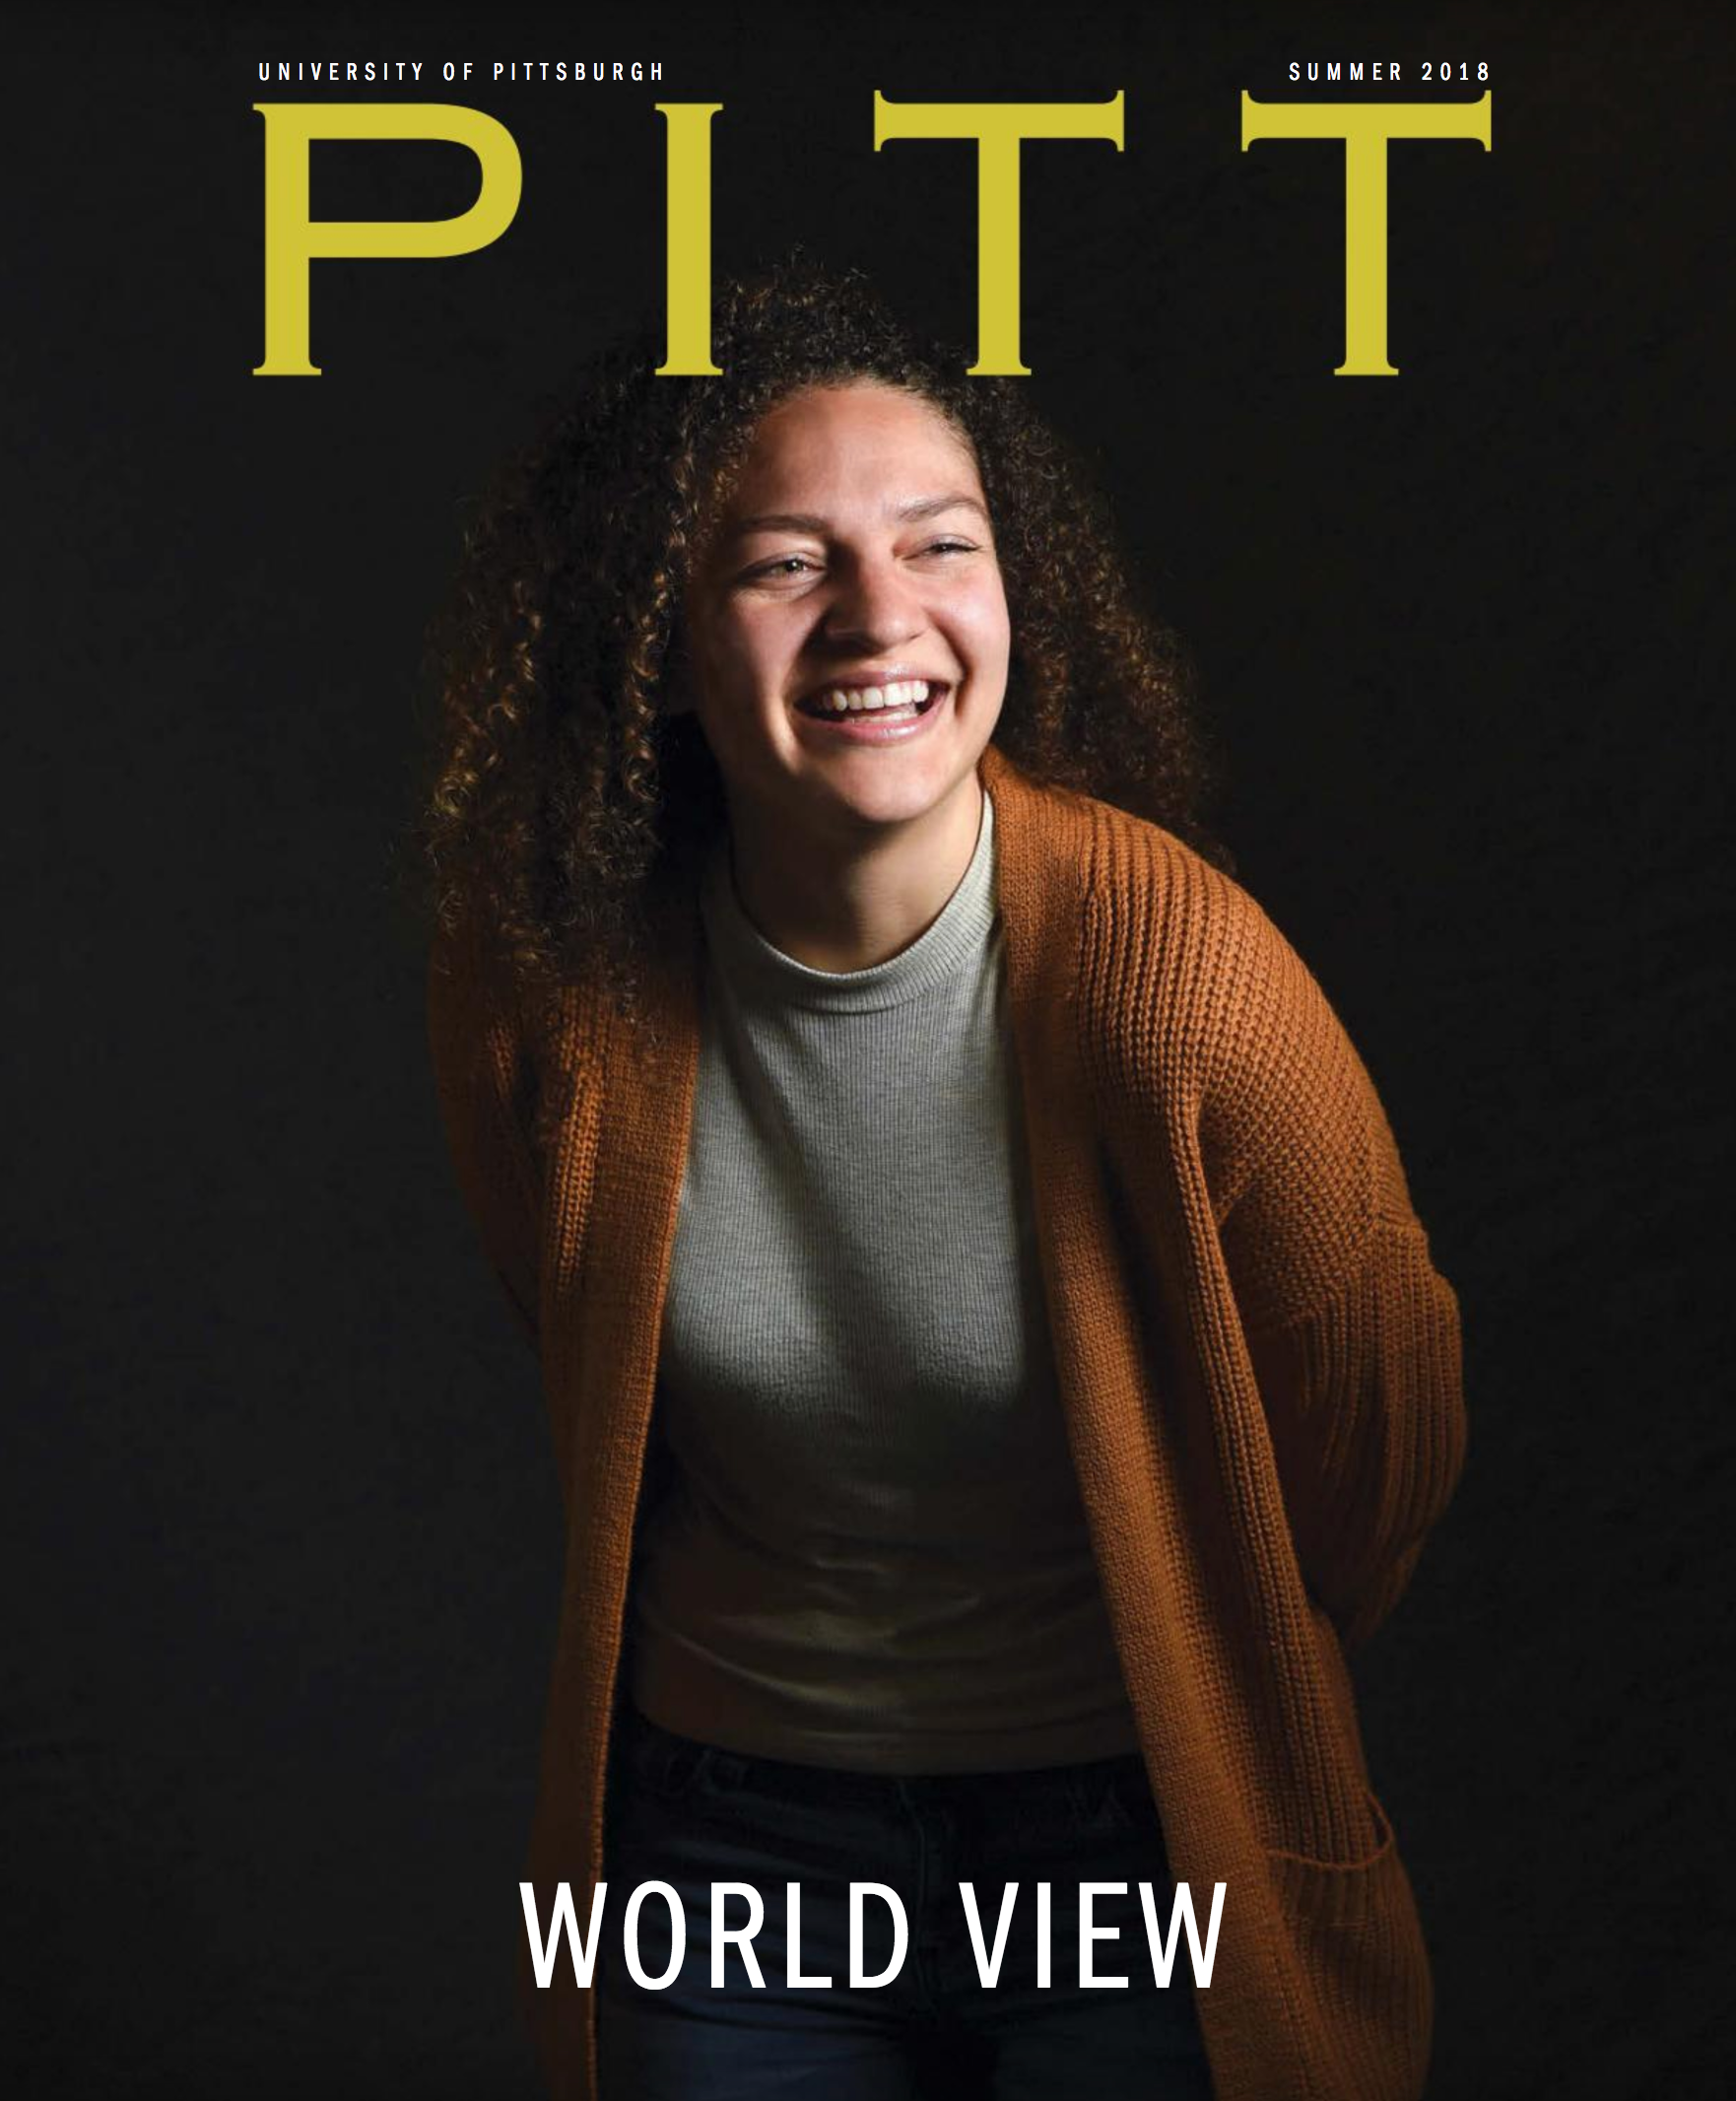 cover of the issue, which features a young smiling woman in a rusty colored sweater